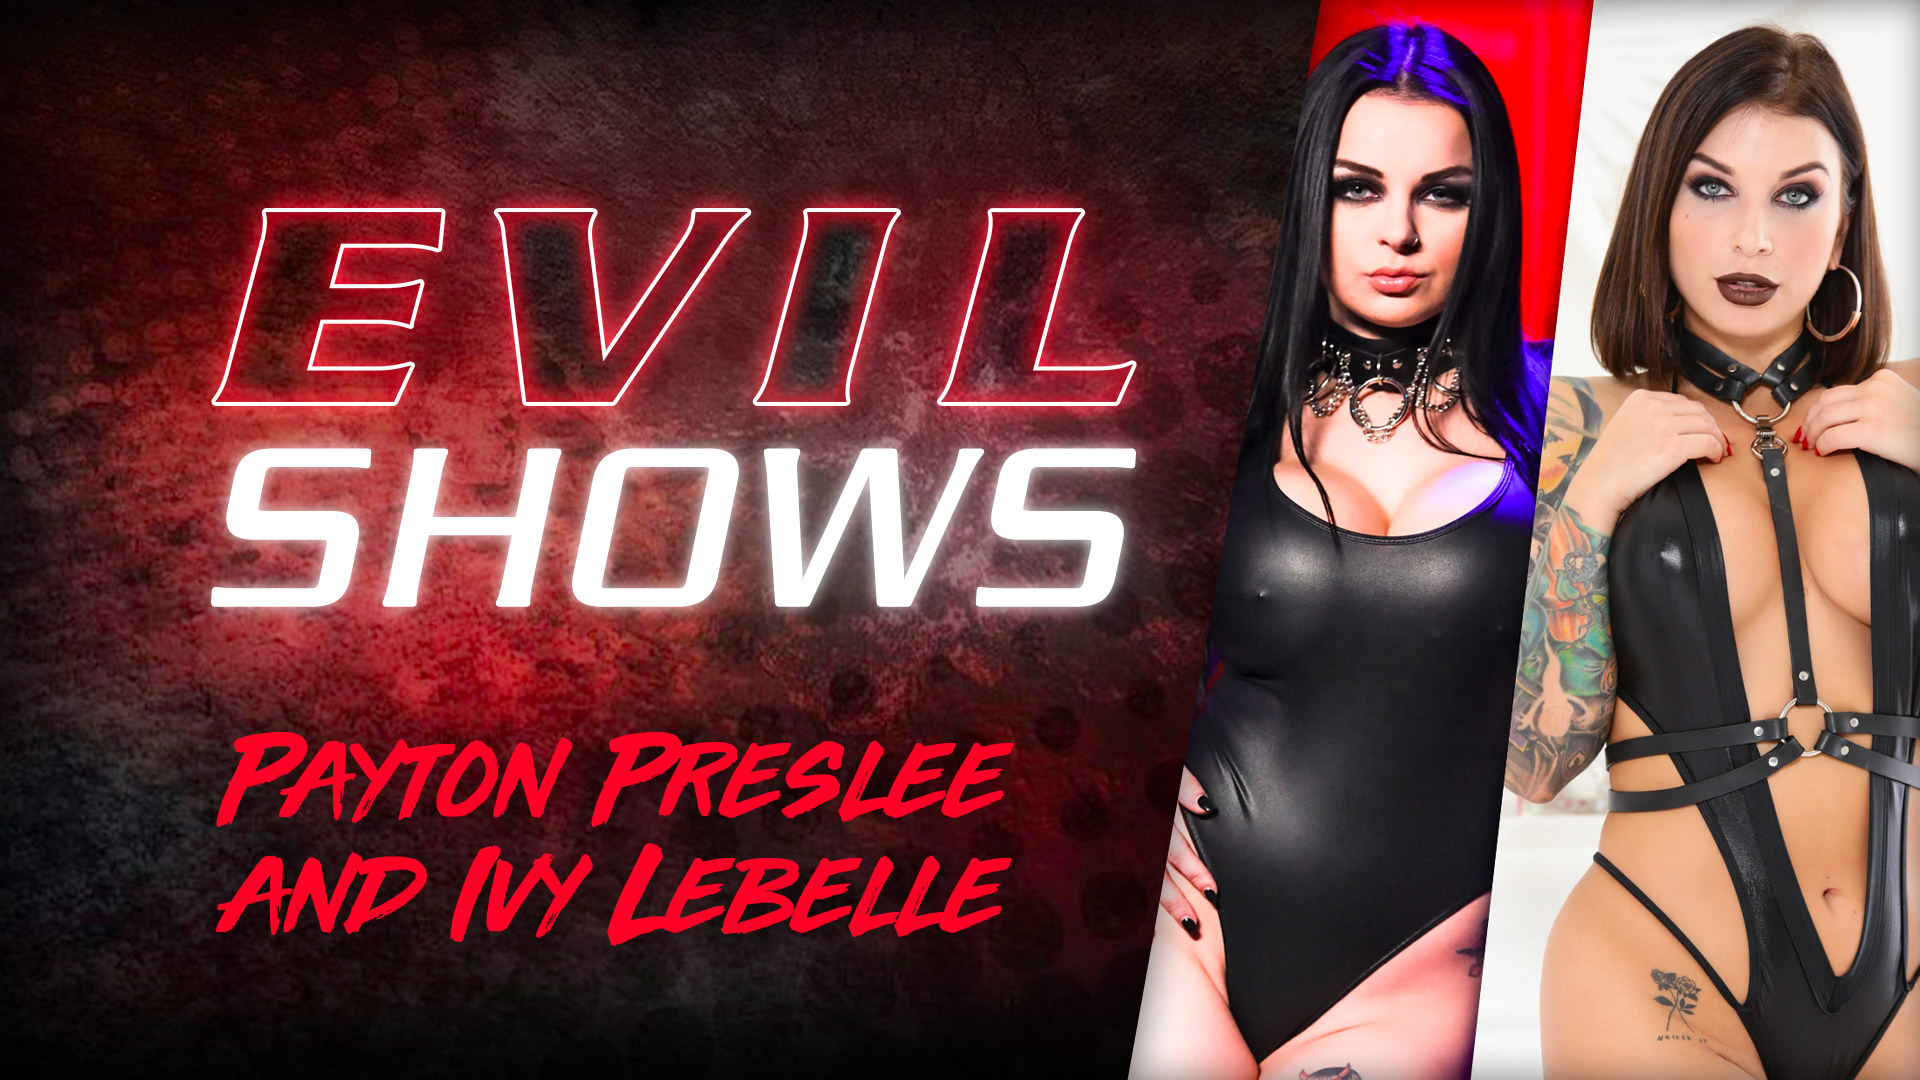 Evil shows ivy lebelle and payton preslee ivy lebelle and